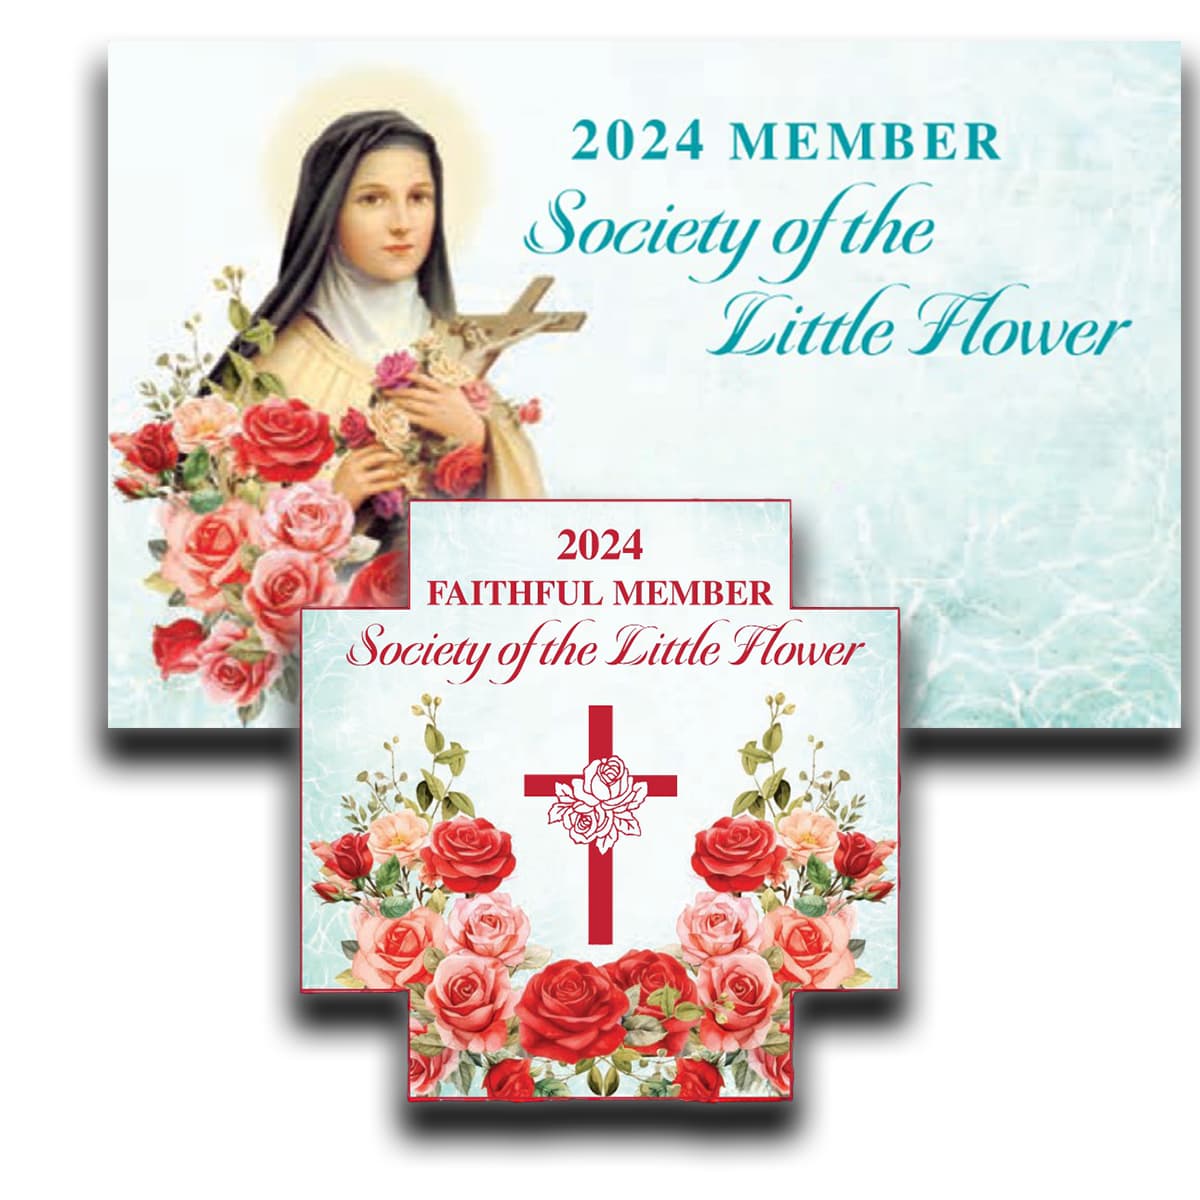 St Therese Member Card and A Cross Shaped Car Member Magnet